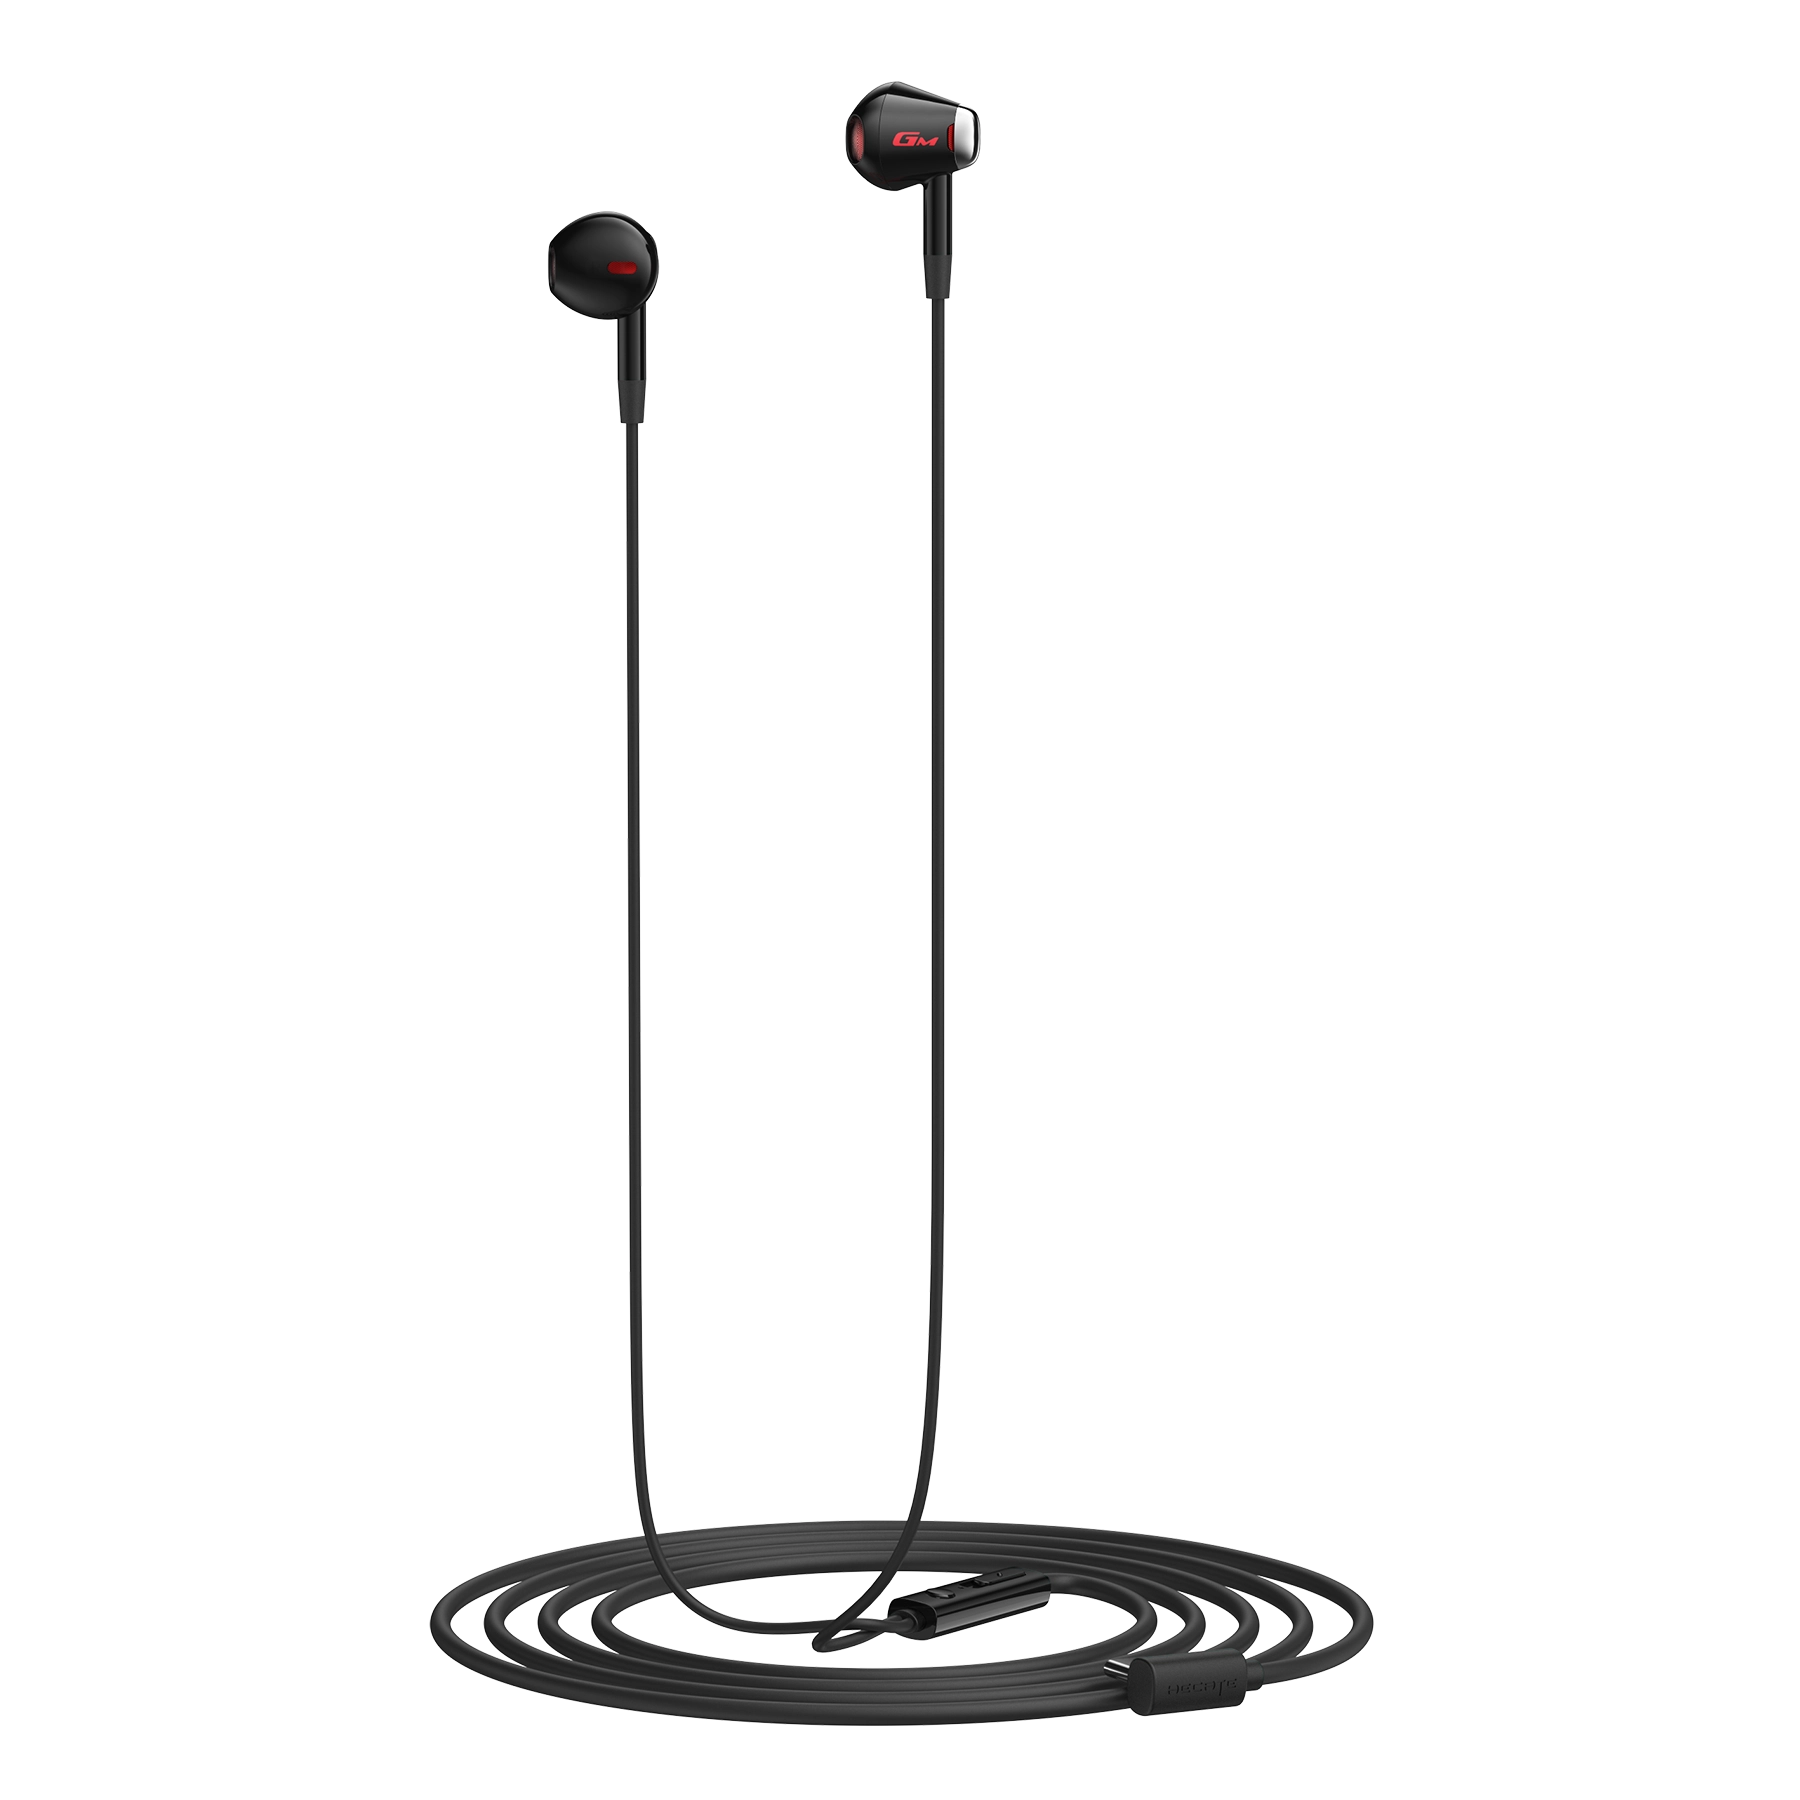 GM180 PLUS Earbuds Product Pictures black_5